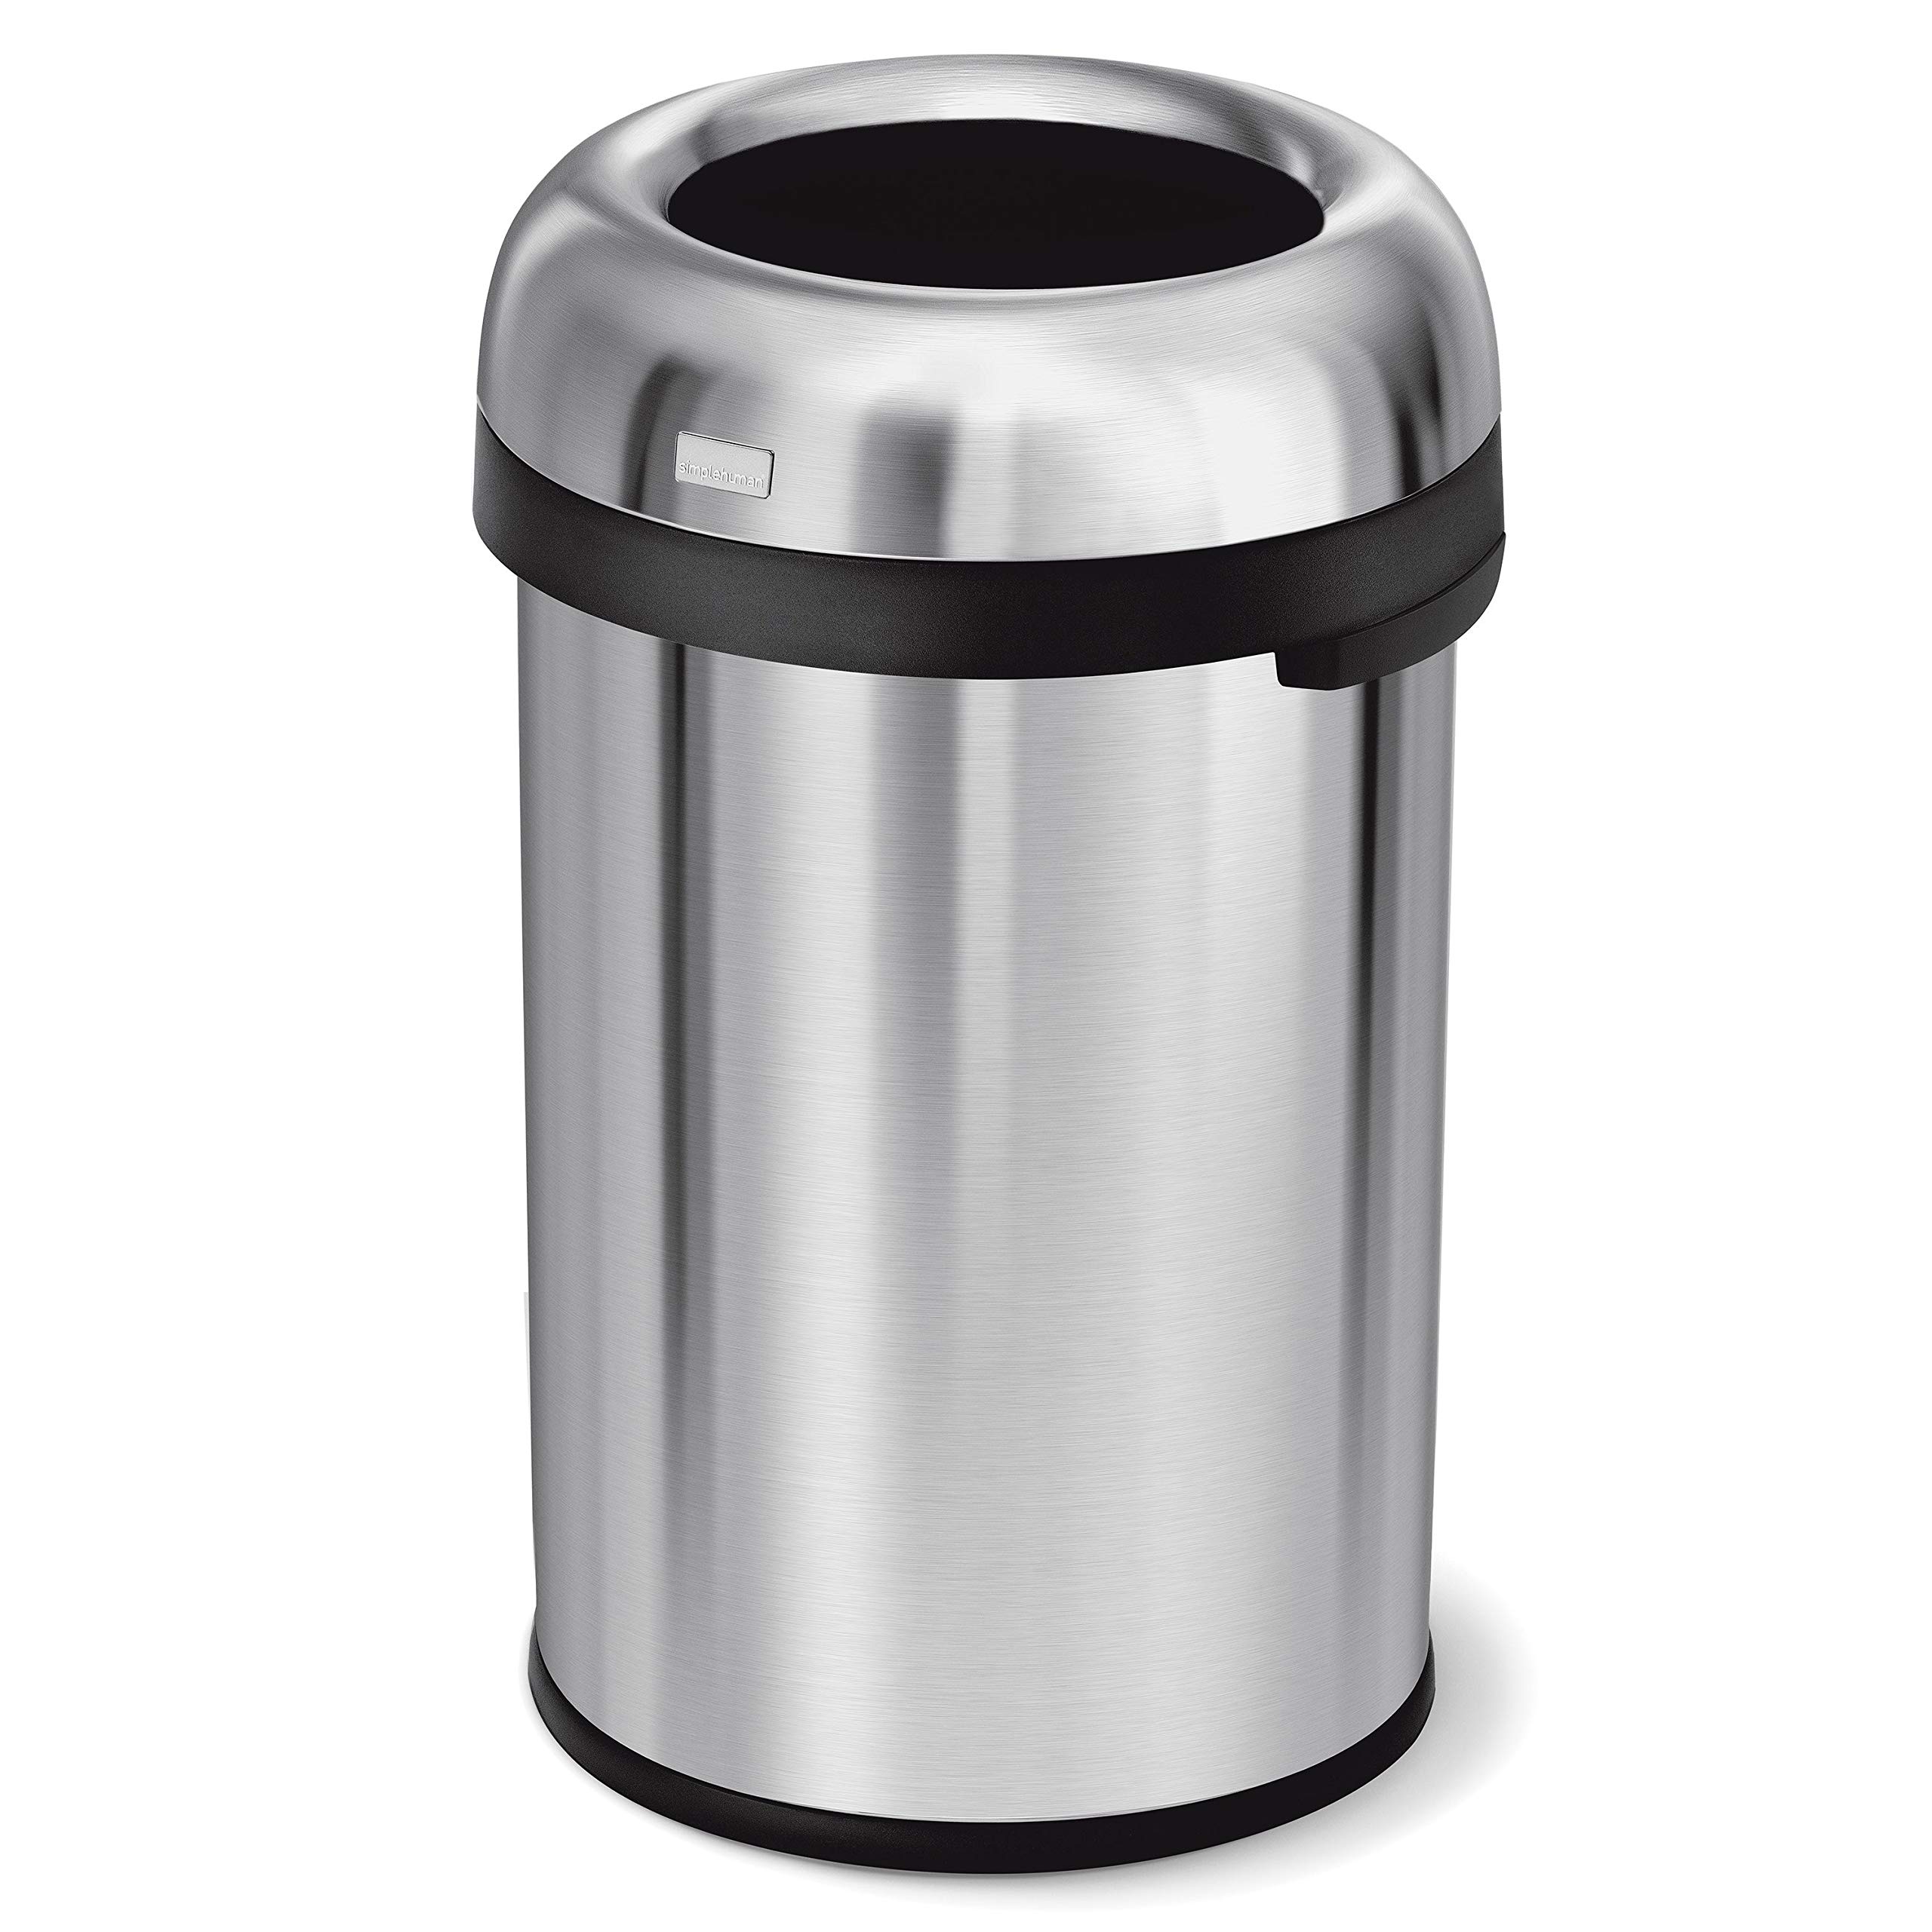 Book Cover simplehuman 115 Liter / 30 Gallon Bullet Open Top Trash Can Commercial Grade Heavy Gauge, Brushed Stainless Steel Brushed 115 Liter Round Trash can